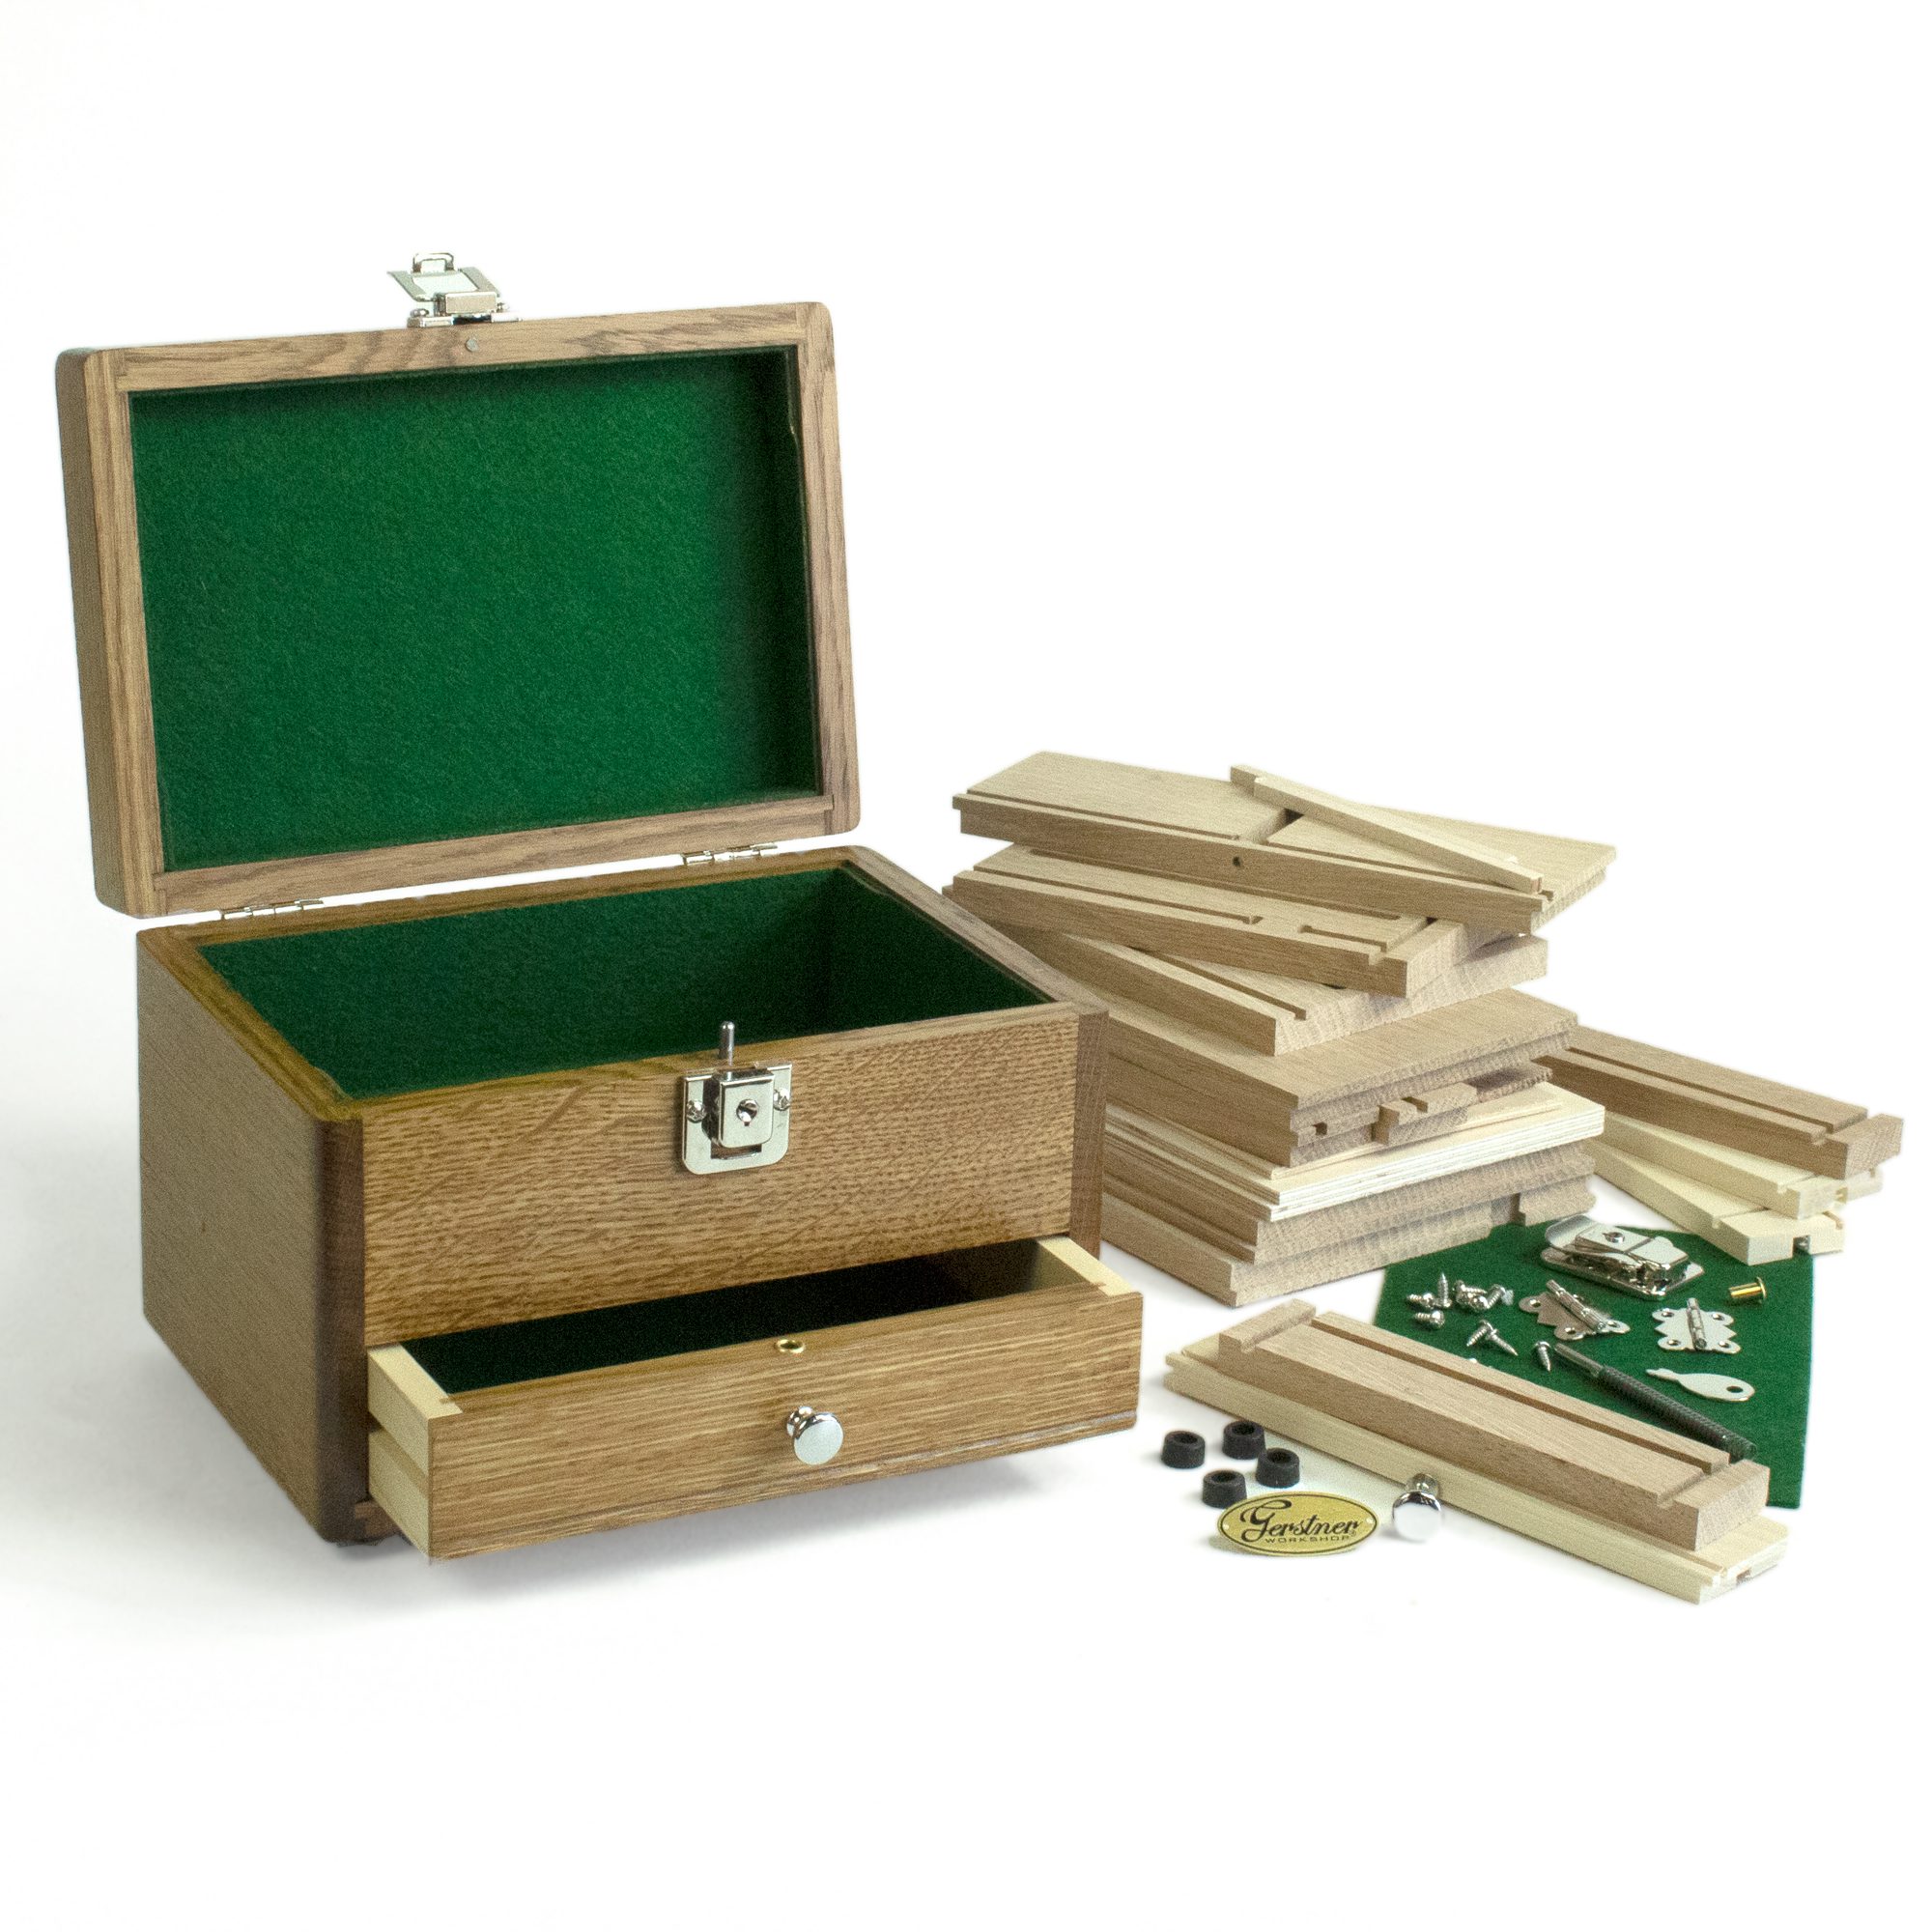 Woodworking Kits for Kids, Build Your Own Wooden Palestine